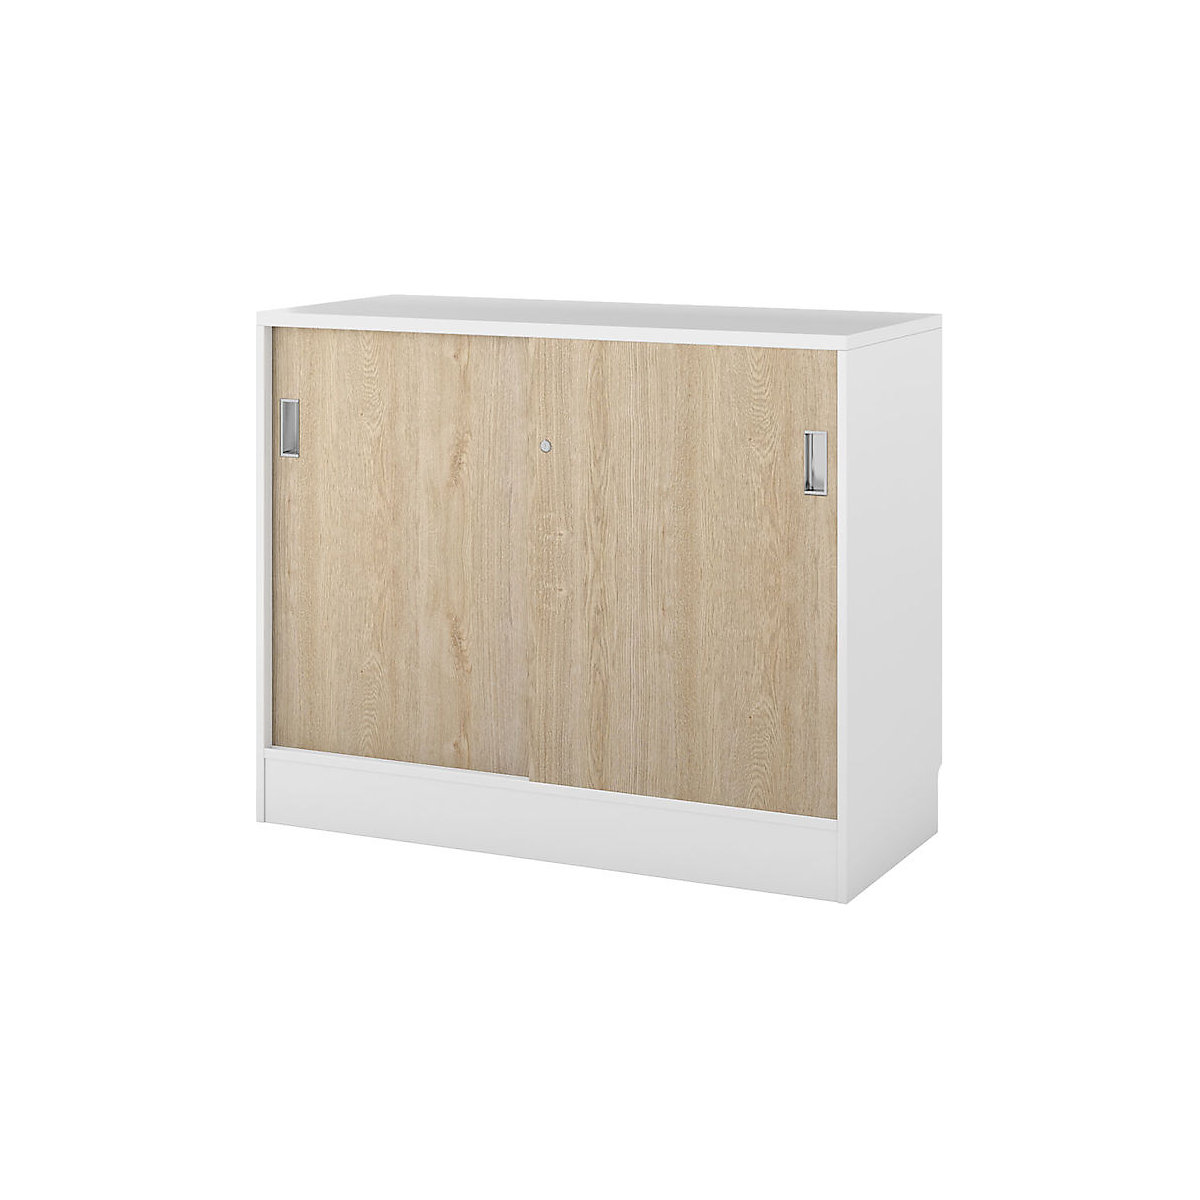 Chicago cupboard with sliding doors, HxWxD 948 x 1215 x 400 mm, brushed white / oak-9